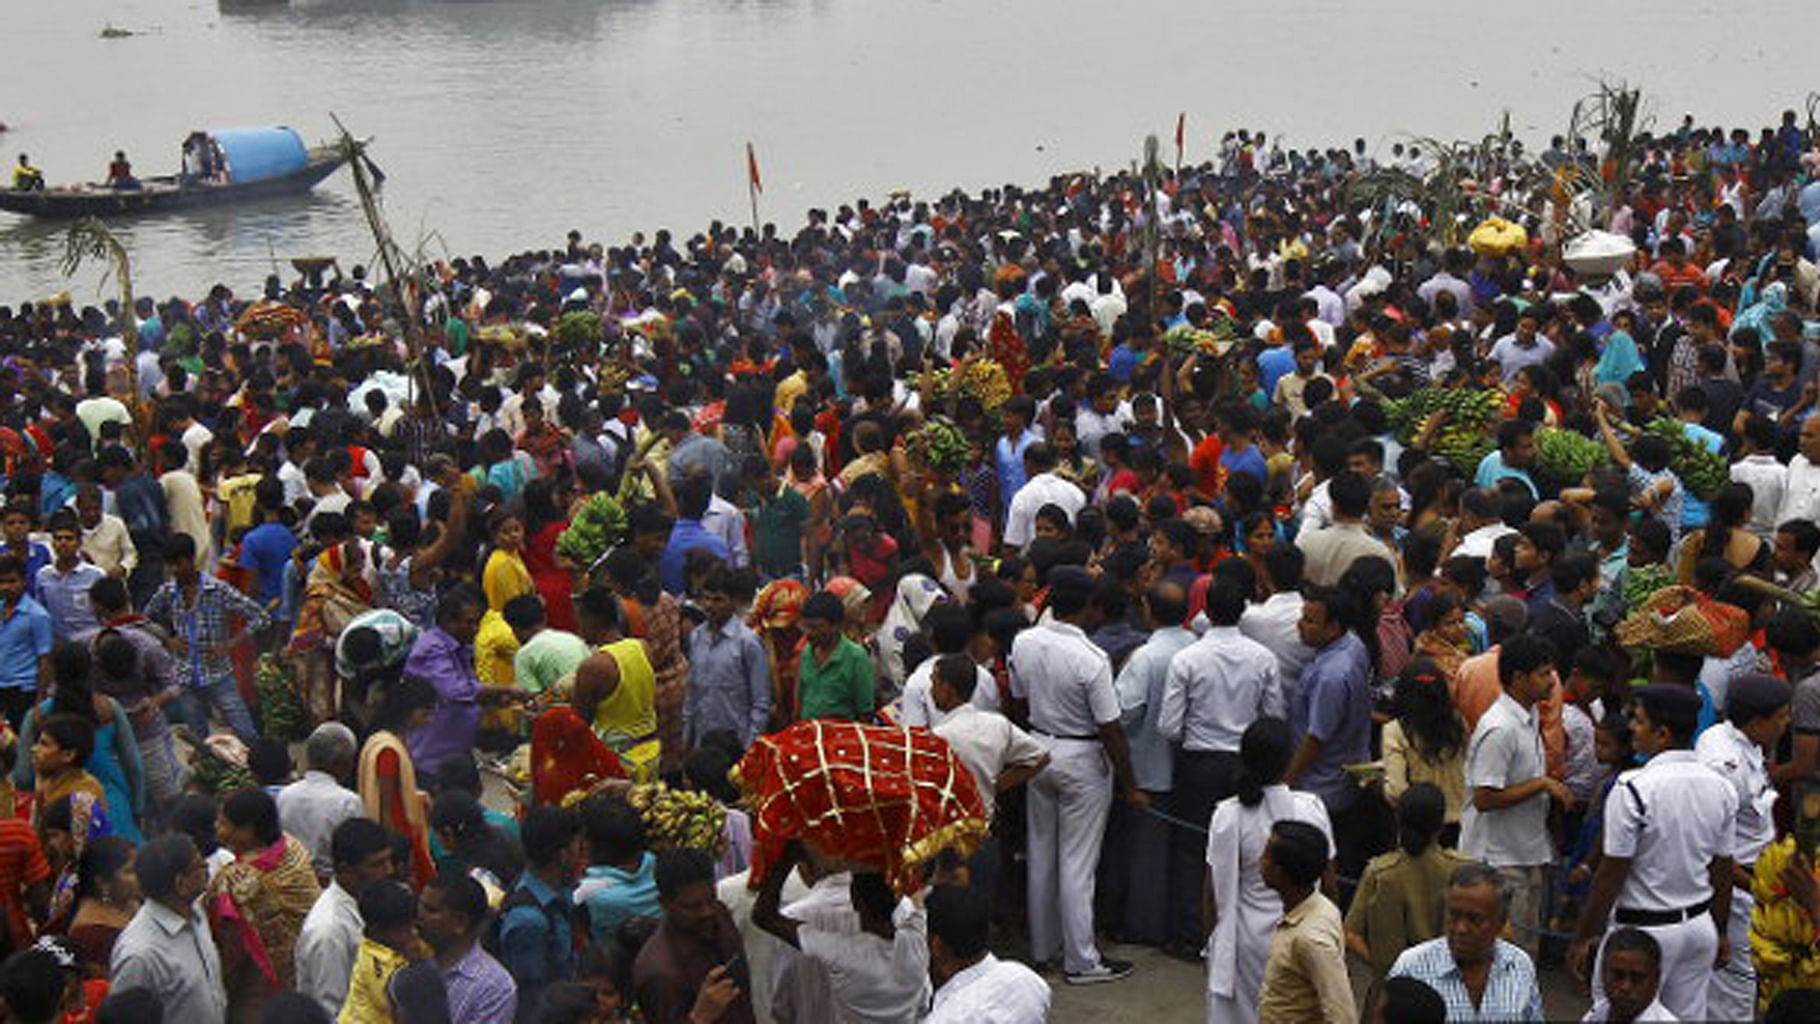 Devotees gather on the banks of river Ganga to perform rituals in Kolkata. If India’s parliamentary seats were to be re-allocated across states on the basis of population –the Constitution requires that the allocation be looked at in 2026 – the Gangetic belt would send 275 of 548 MPs to the Lok Sabha, according to estimates. (Photo: Reuters/IndiaSpend)